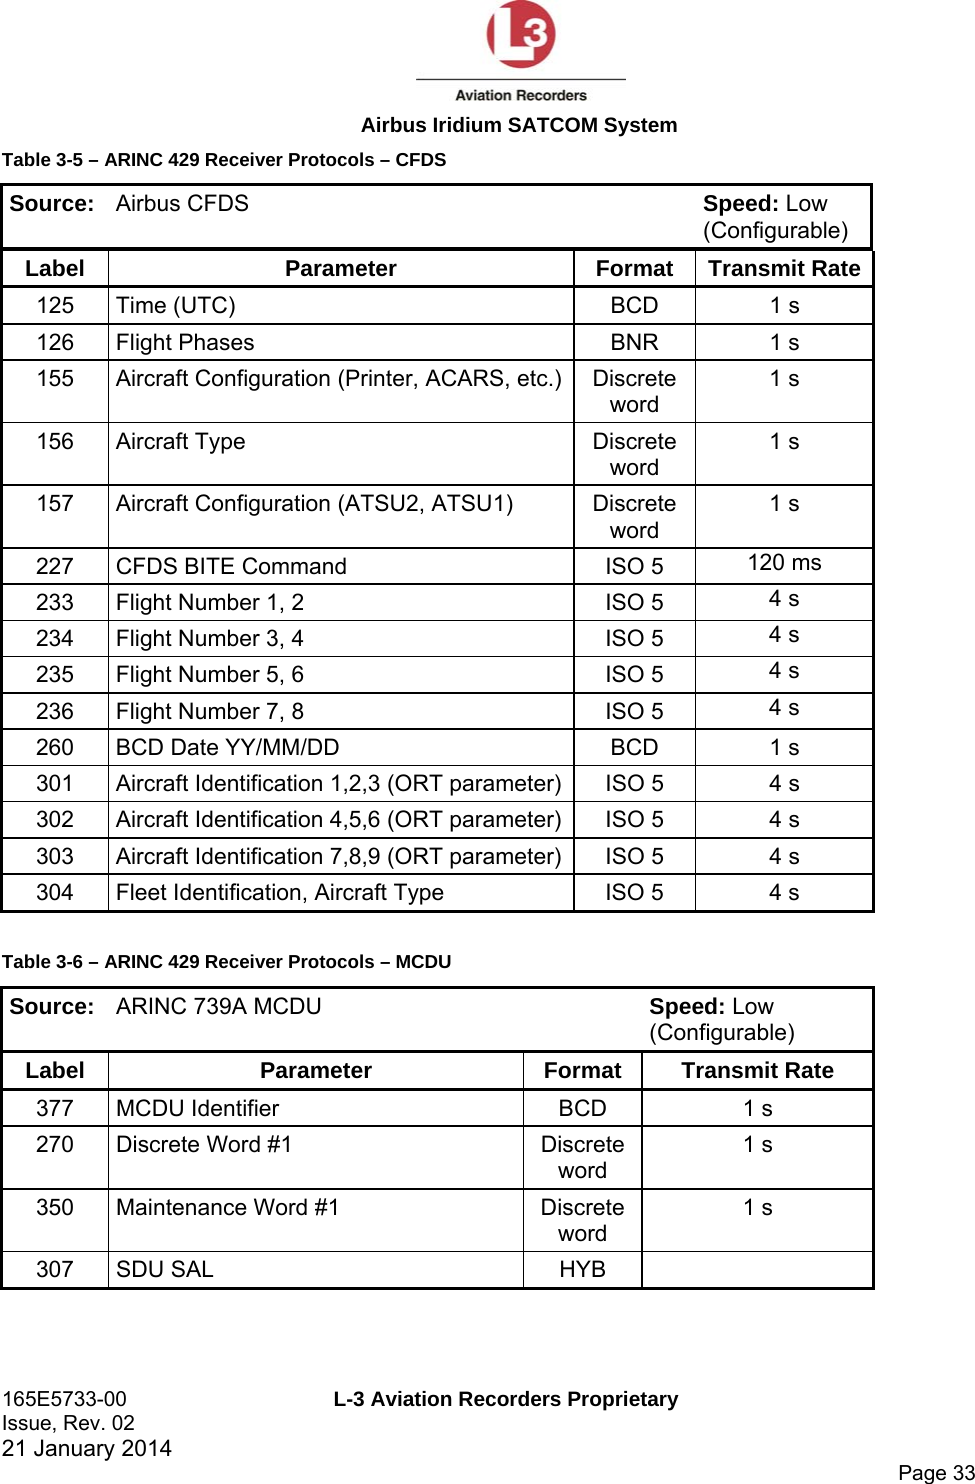  Airbus Iridium SATCOM System 165E5733-00  L-3 Aviation Recorders Proprietary Issue, Rev. 02   21 January 2014      Page 33 Table 3-5 – ARINC 429 Receiver Protocols – CFDS Source:  Airbus CFDS  Speed: Low (Configurable) Label Parameter Format Transmit Rate 125  Time (UTC)  BCD  1 s 126  Flight Phases  BNR  1 s 155  Aircraft Configuration (Printer, ACARS, etc.) Discrete word 1 s 156 Aircraft Type  Discrete word 1 s 157  Aircraft Configuration (ATSU2, ATSU1)  Discrete word 1 s 227  CFDS BITE Command  ISO 5  120 ms 233  Flight Number 1, 2  ISO 5  4 s 234  Flight Number 3, 4  ISO 5  4 s 235  Flight Number 5, 6  ISO 5  4 s 236  Flight Number 7, 8  ISO 5  4 s 260  BCD Date YY/MM/DD  BCD  1 s 301  Aircraft Identification 1,2,3 (ORT parameter) ISO 5  4 s 302  Aircraft Identification 4,5,6 (ORT parameter) ISO 5  4 s 303  Aircraft Identification 7,8,9 (ORT parameter) ISO 5  4 s 304  Fleet Identification, Aircraft Type  ISO 5  4 s  Table 3-6 – ARINC 429 Receiver Protocols – MCDU Source:  ARINC 739A MCDU  Speed: Low (Configurable) Label Parameter Format Transmit Rate 377  MCDU Identifier  BCD  1 s 270  Discrete Word #1  Discrete word 1 s 350  Maintenance Word #1  Discrete word 1 s 307 SDU SAL  HYB    